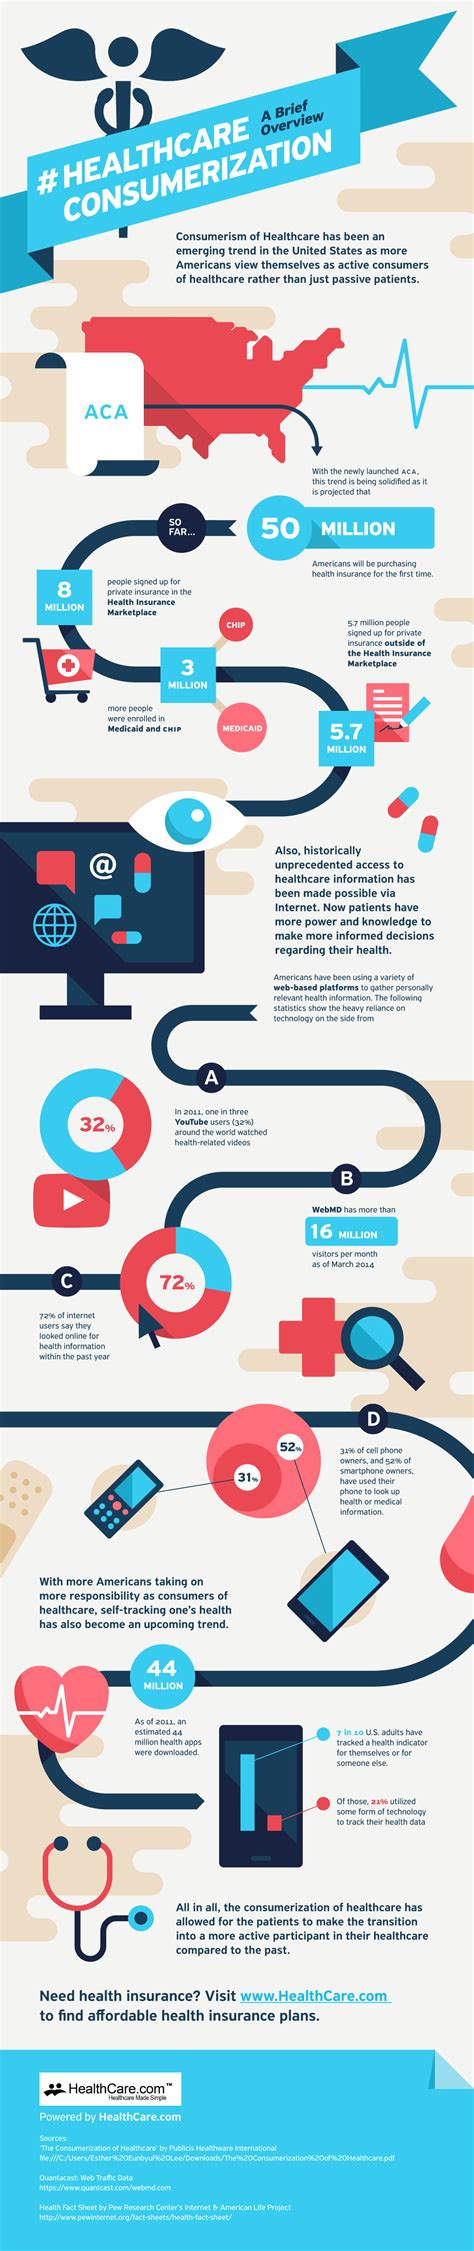 Healthcare Consumerisation A Brief Overview Infographic Visualistan